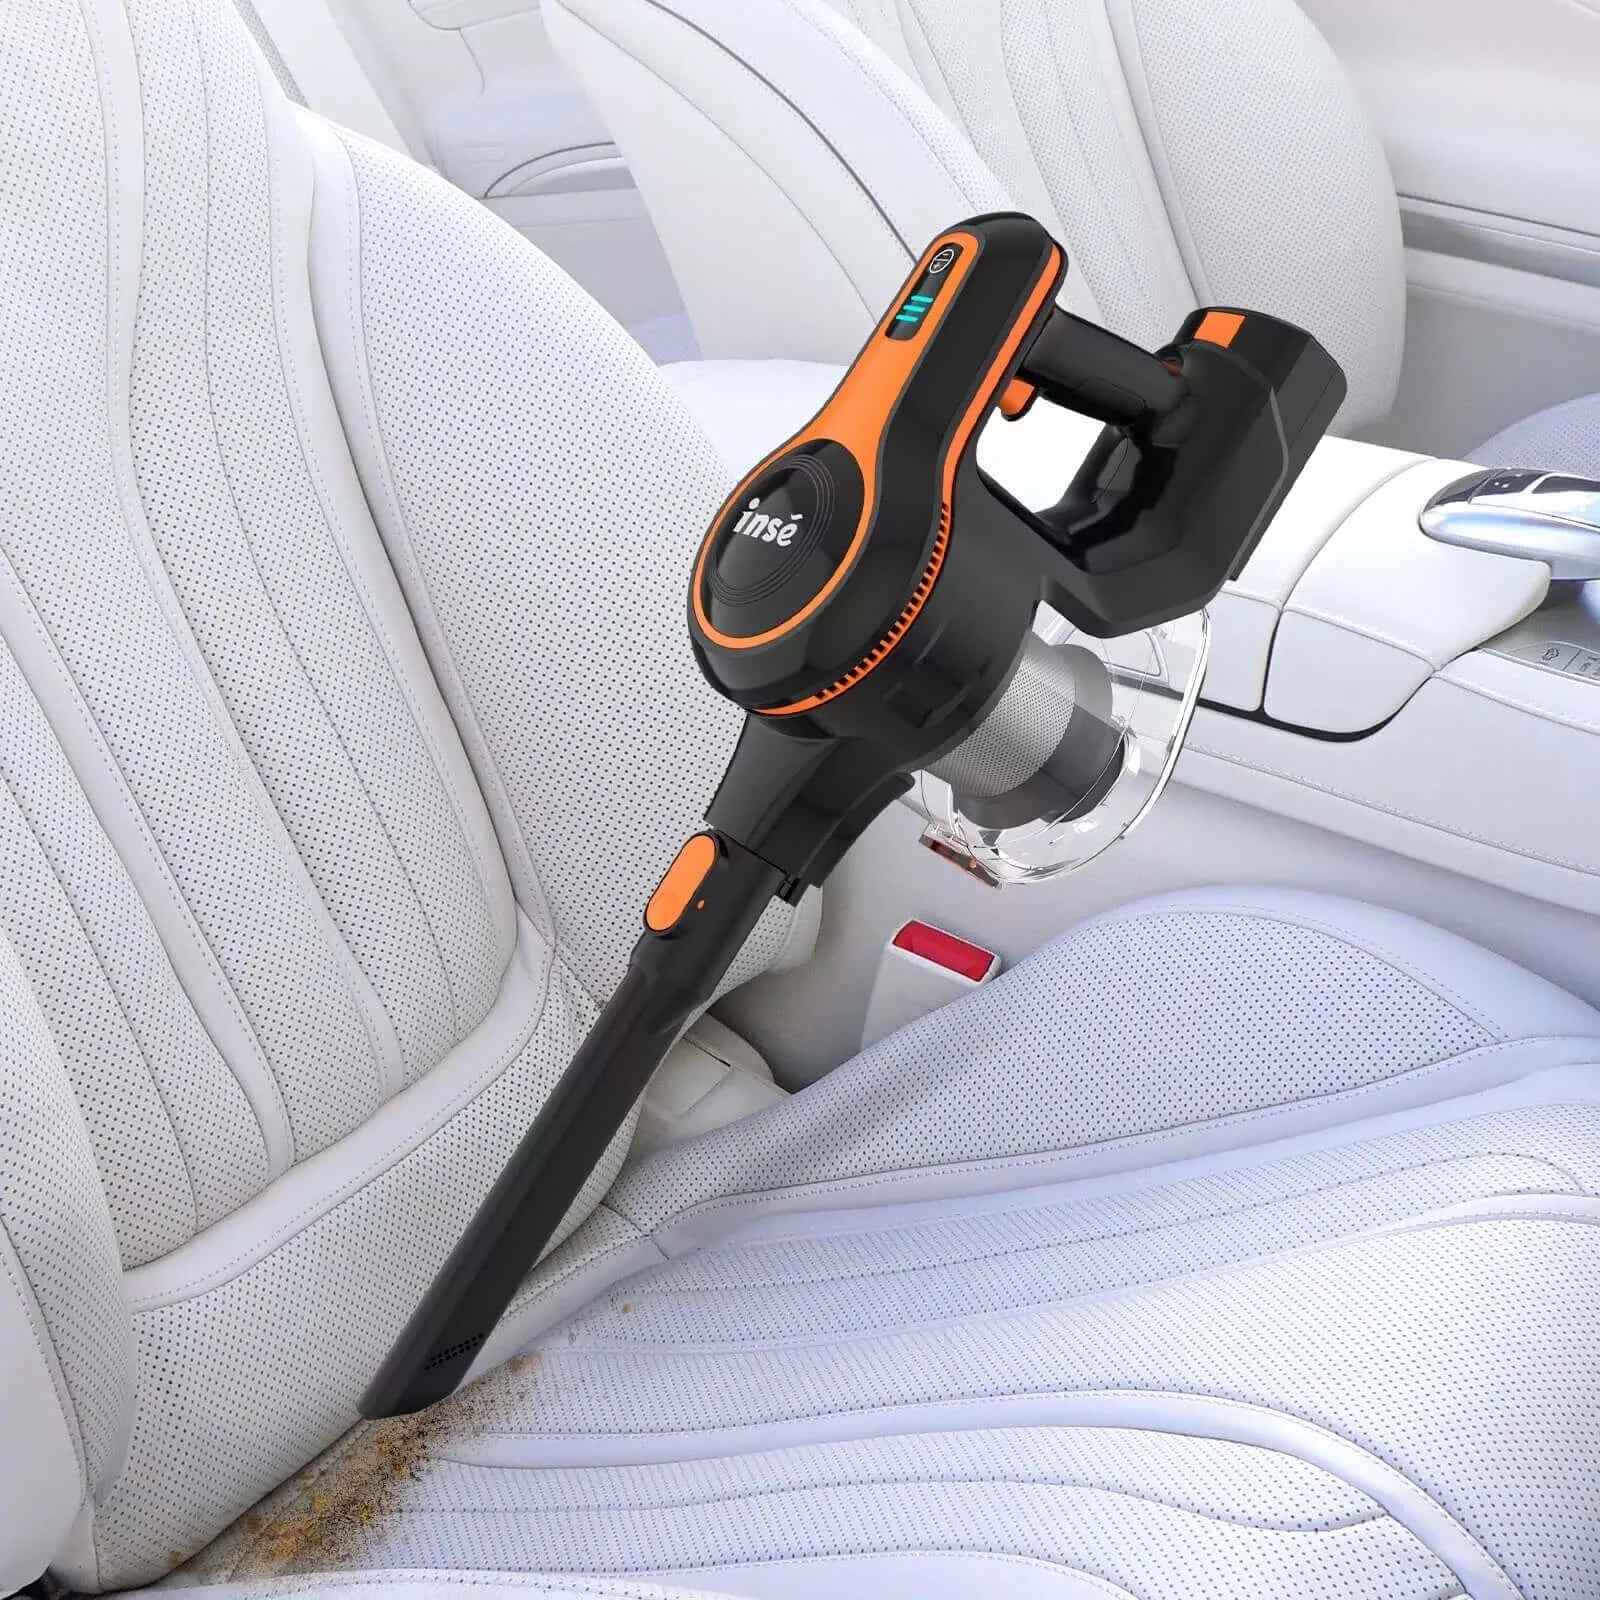 INSE S610 Cordless Vacuum Cleaner 25kpa clean cars with crevice tool-inselife.com